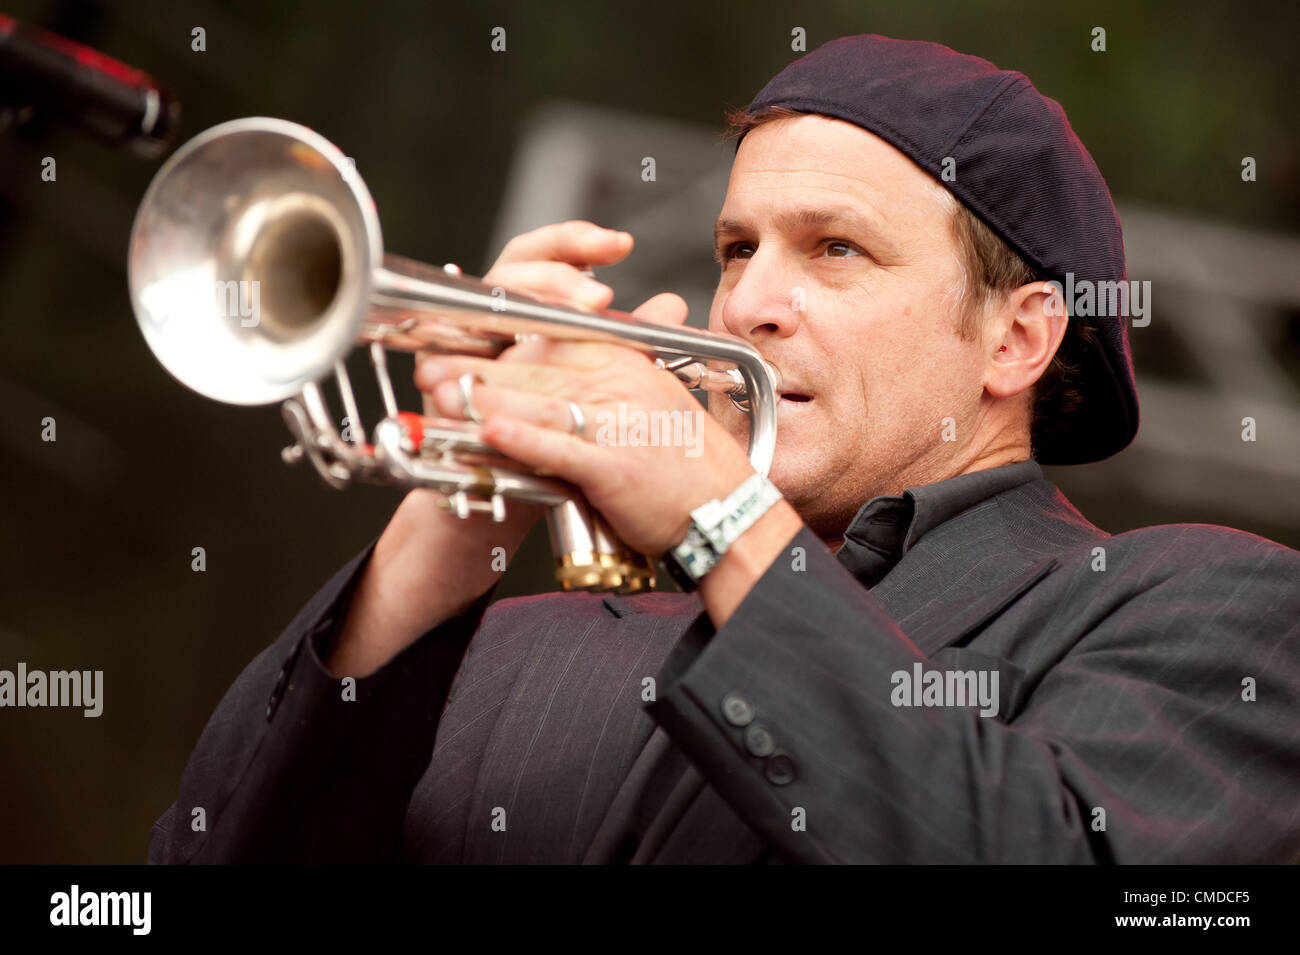 Rock star / musician Vince DiFiore of the alt rock  indie rock  indy rock band Cake | Performing / playing trumpet at the original outdoor summer Firefly Alternative Music Festival in 2012 by Red Frog Events | concert venue located in Dover, Delaware, United States Stock Photo